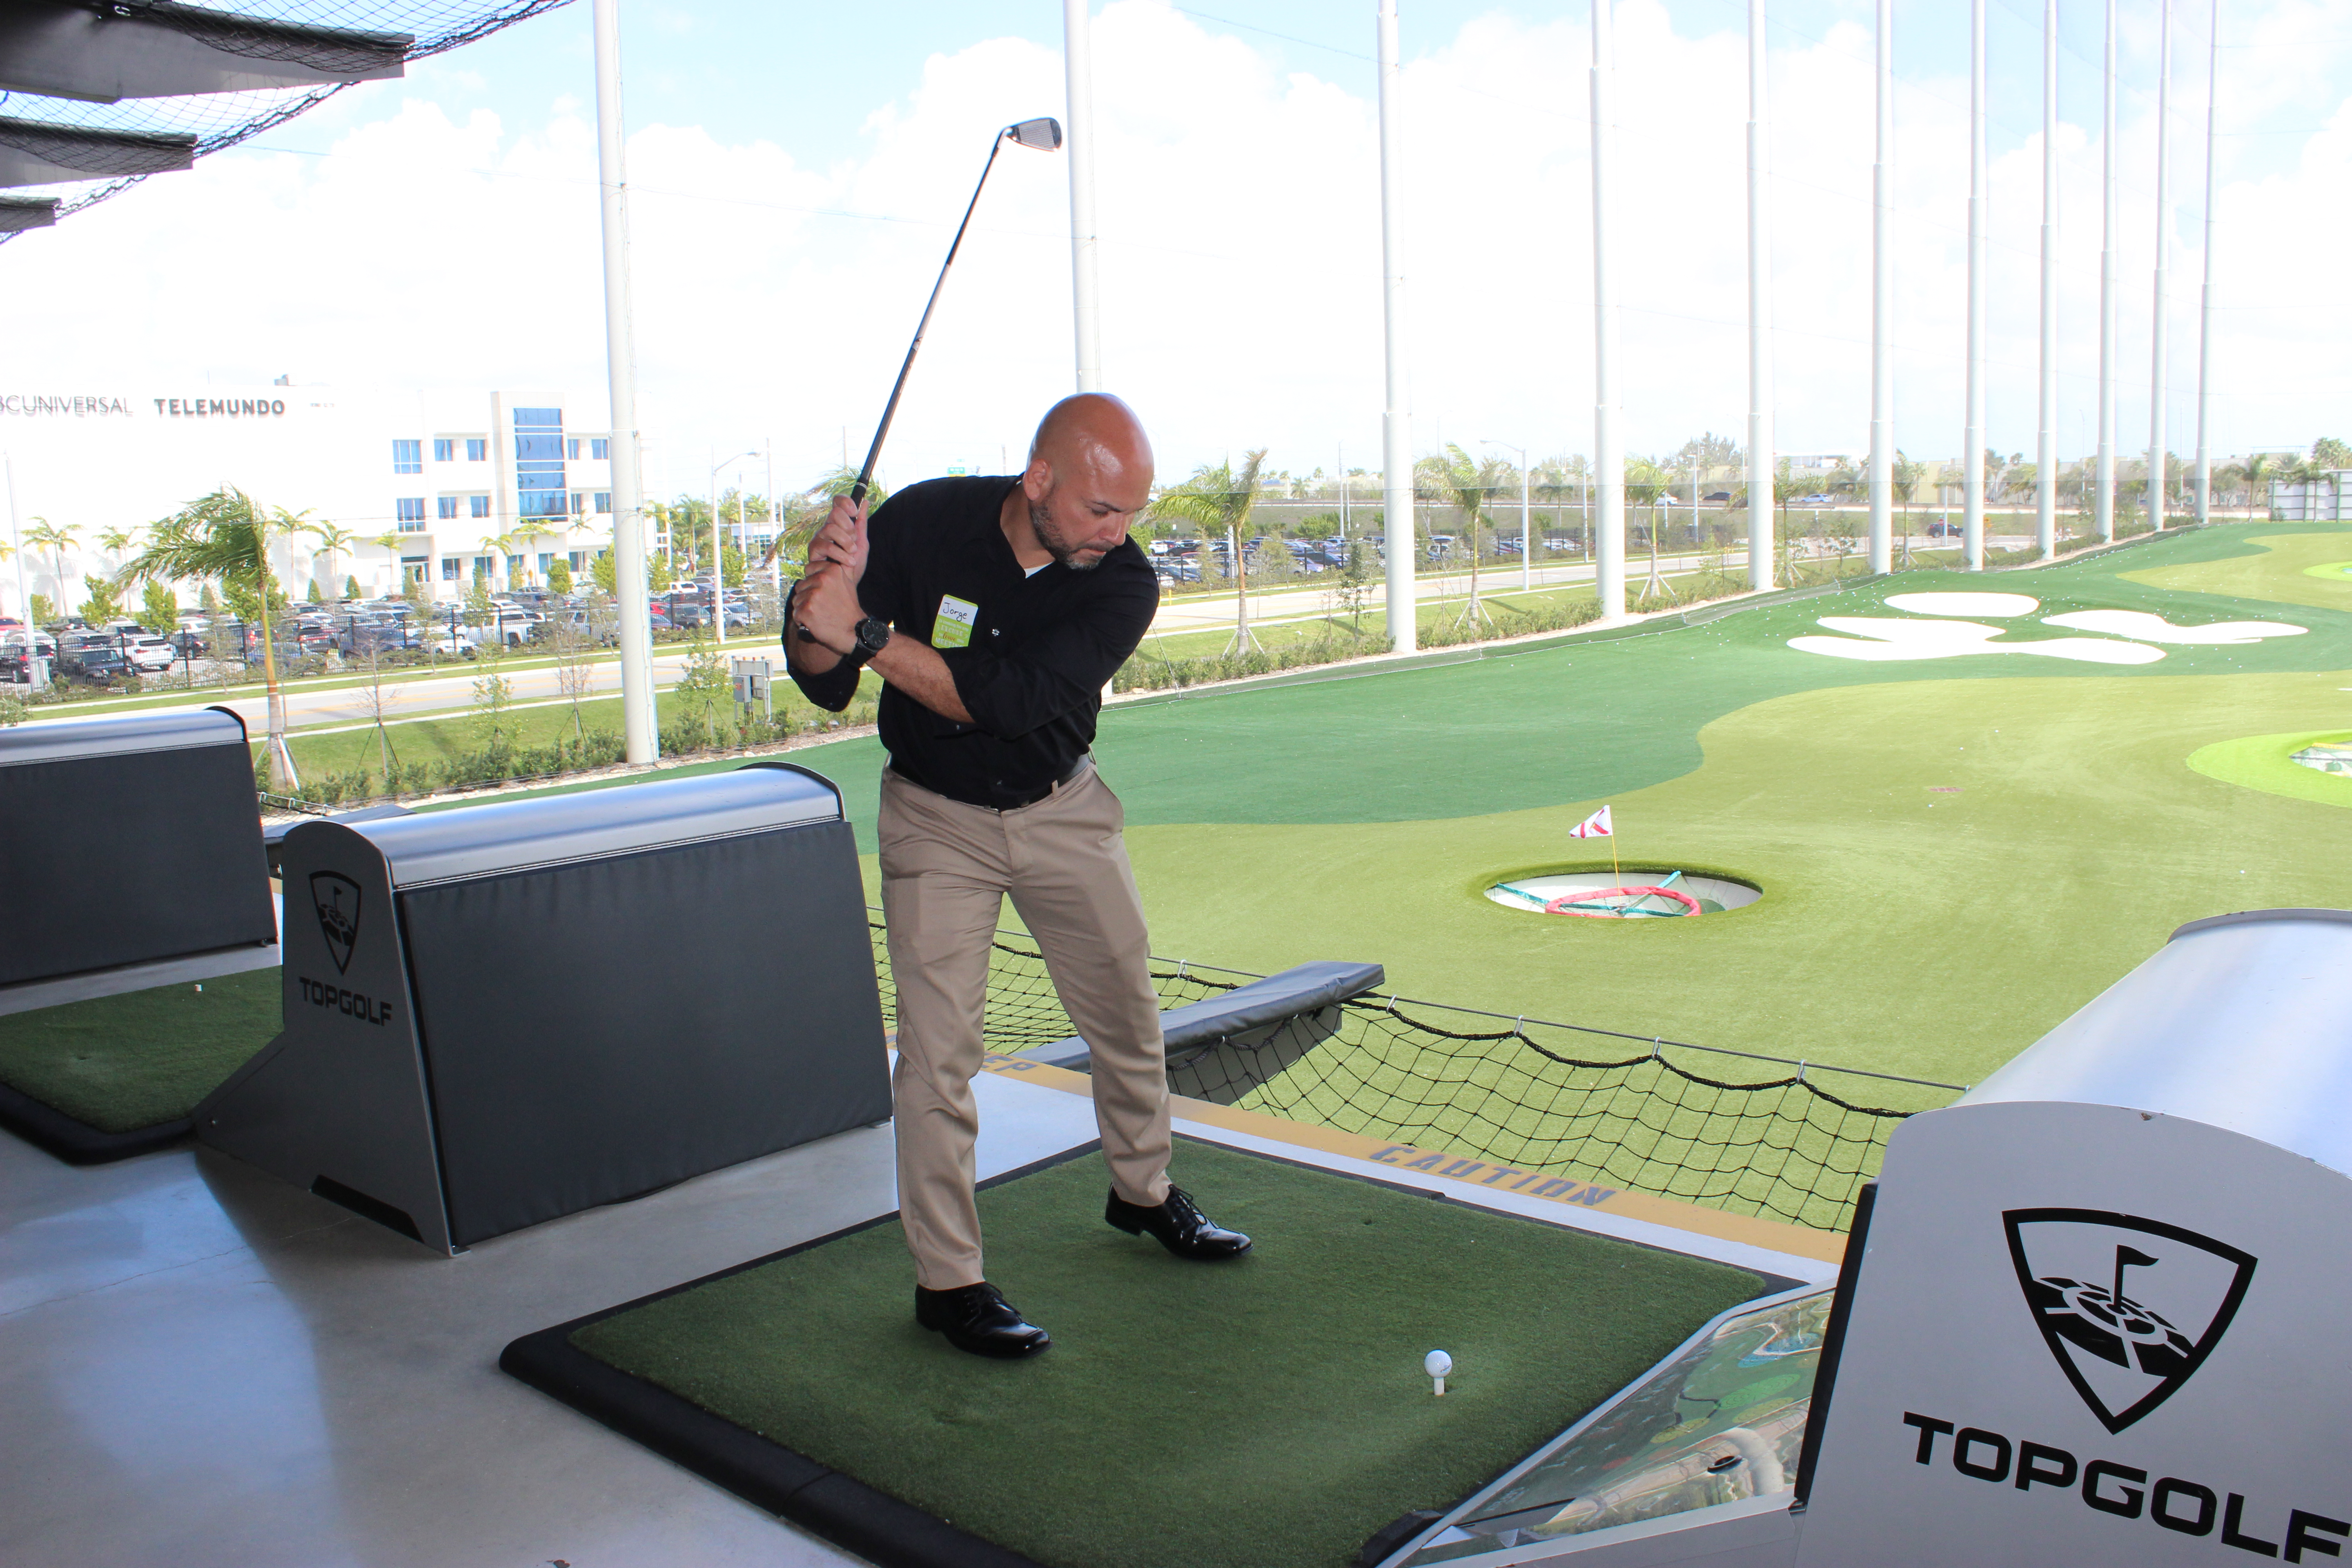 Doral Chamber of Commerce introduces a member playing golf, enjoying himself, and networking at Topgolf Doral Luncheon.